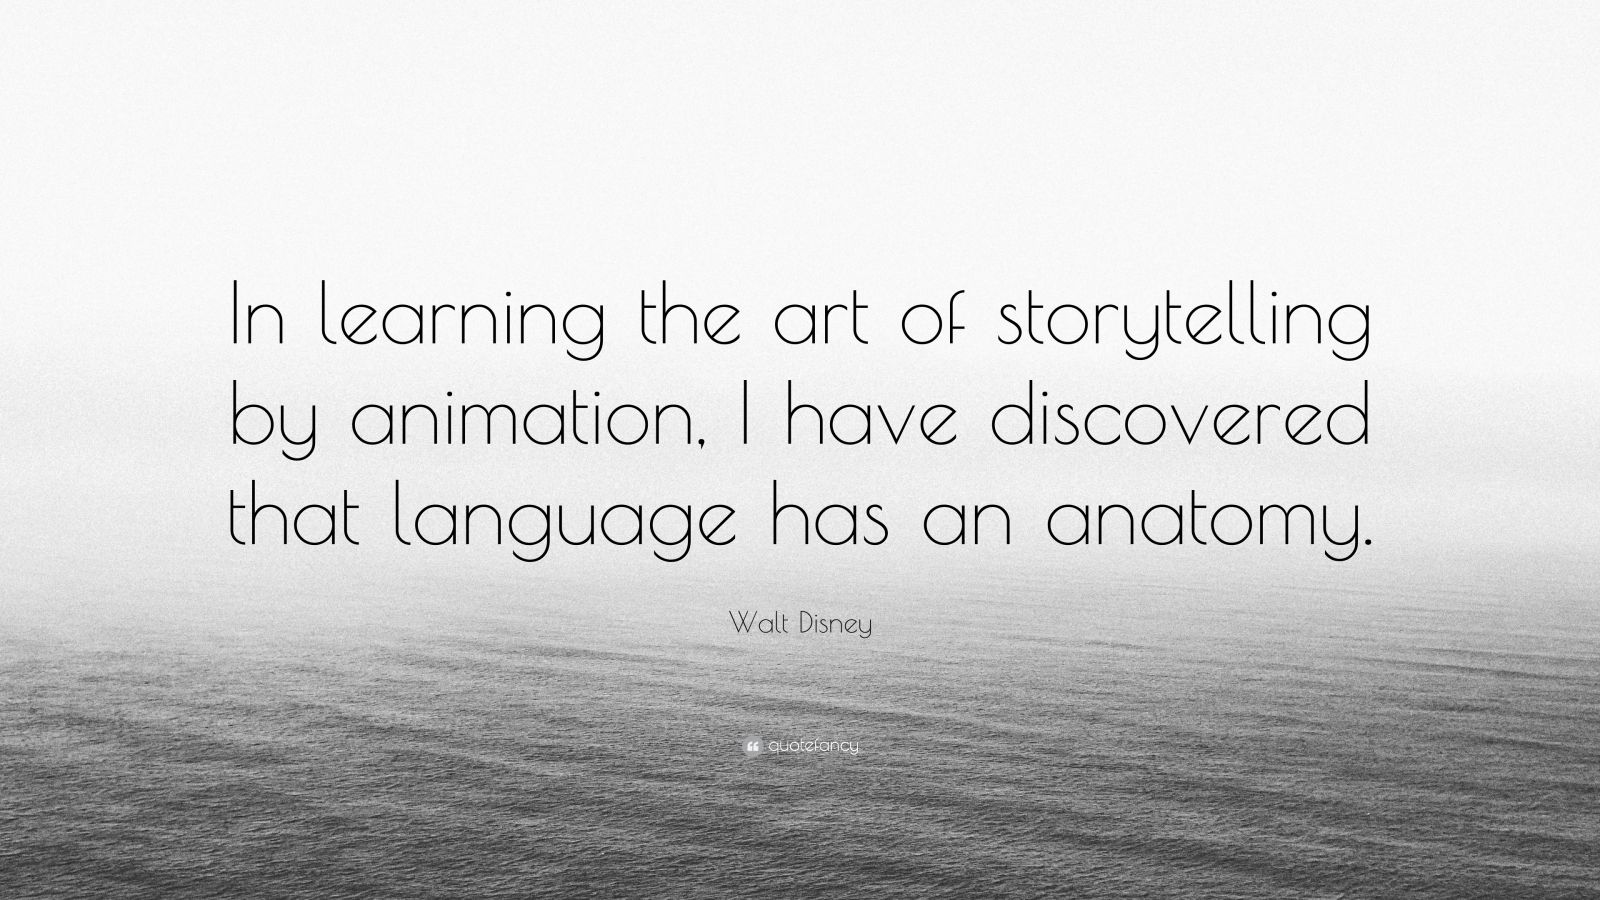 Walt Disney Quote “In learning the art of storytelling by